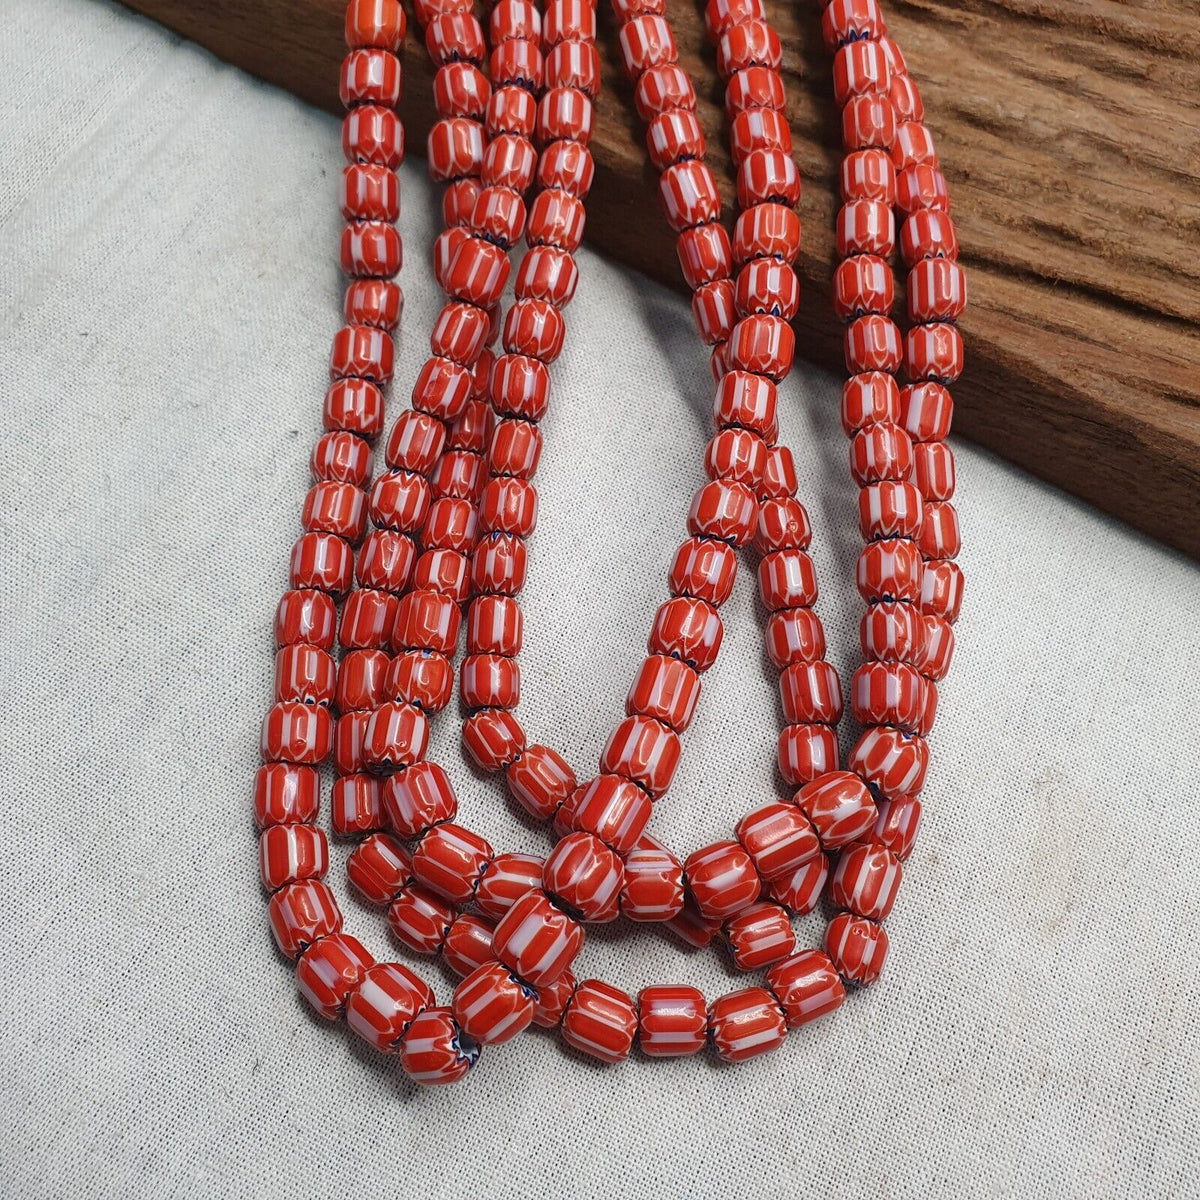 Vintage Venetian Style beads African Red Glass Chevron Beads Long Strand